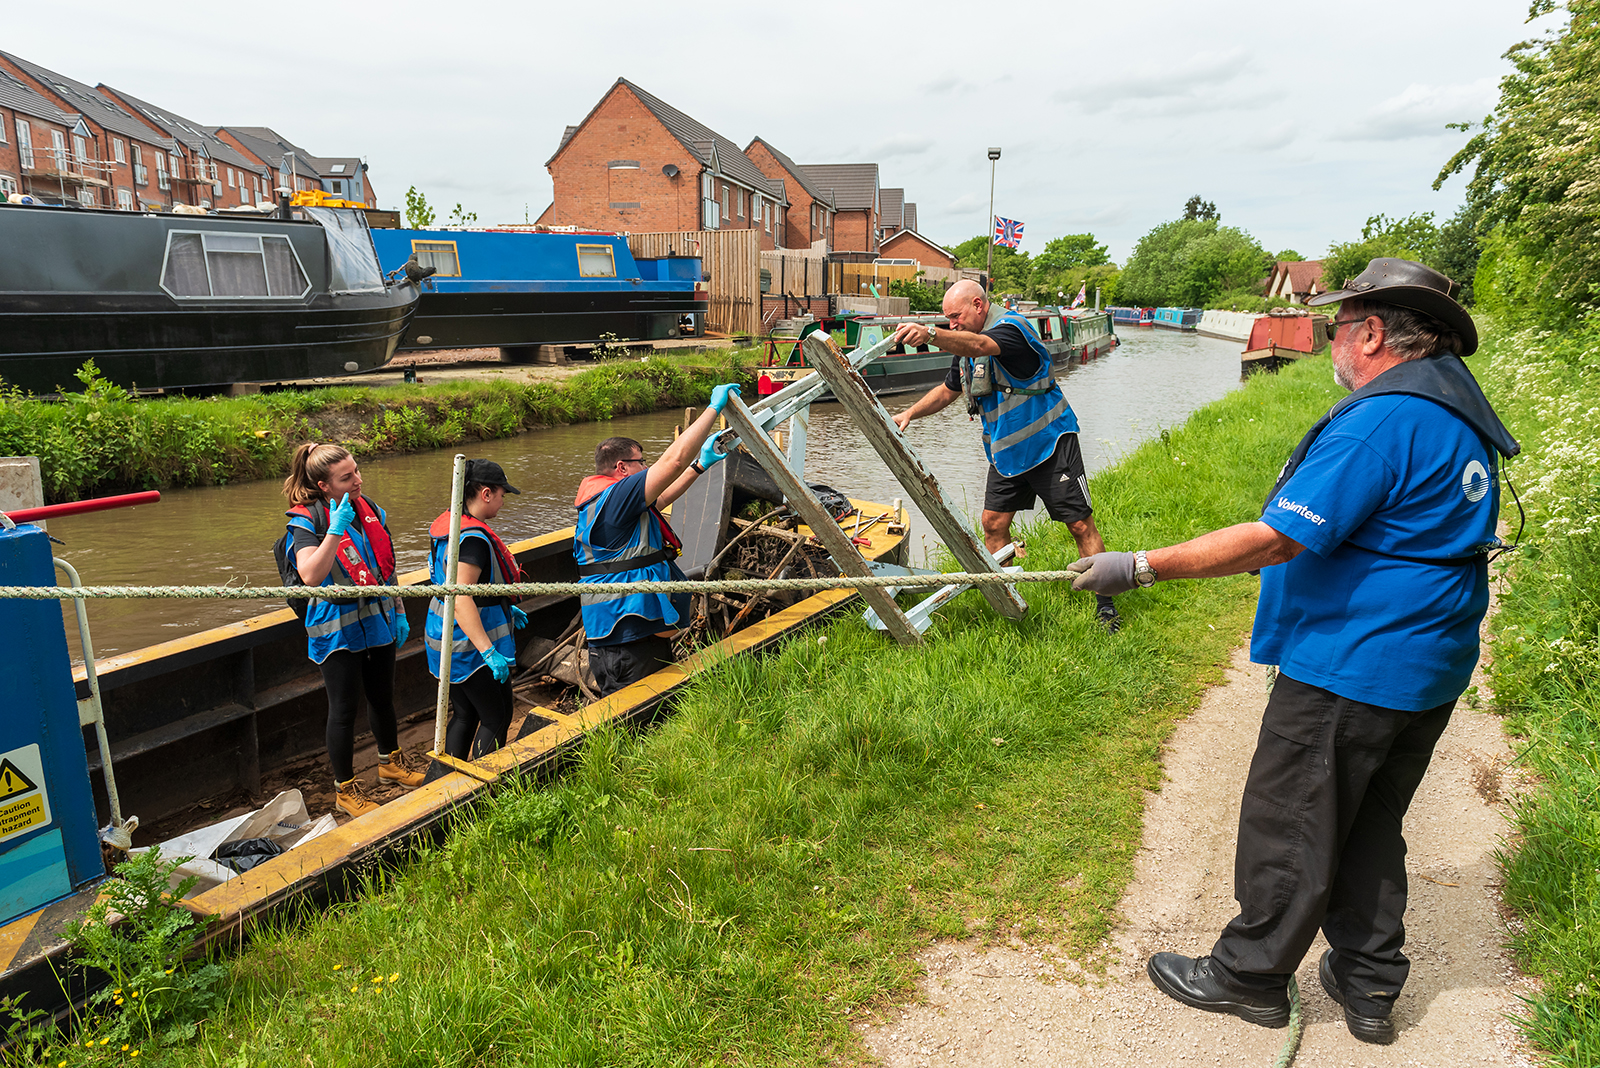 Triton supports local environment with big canal clean-up